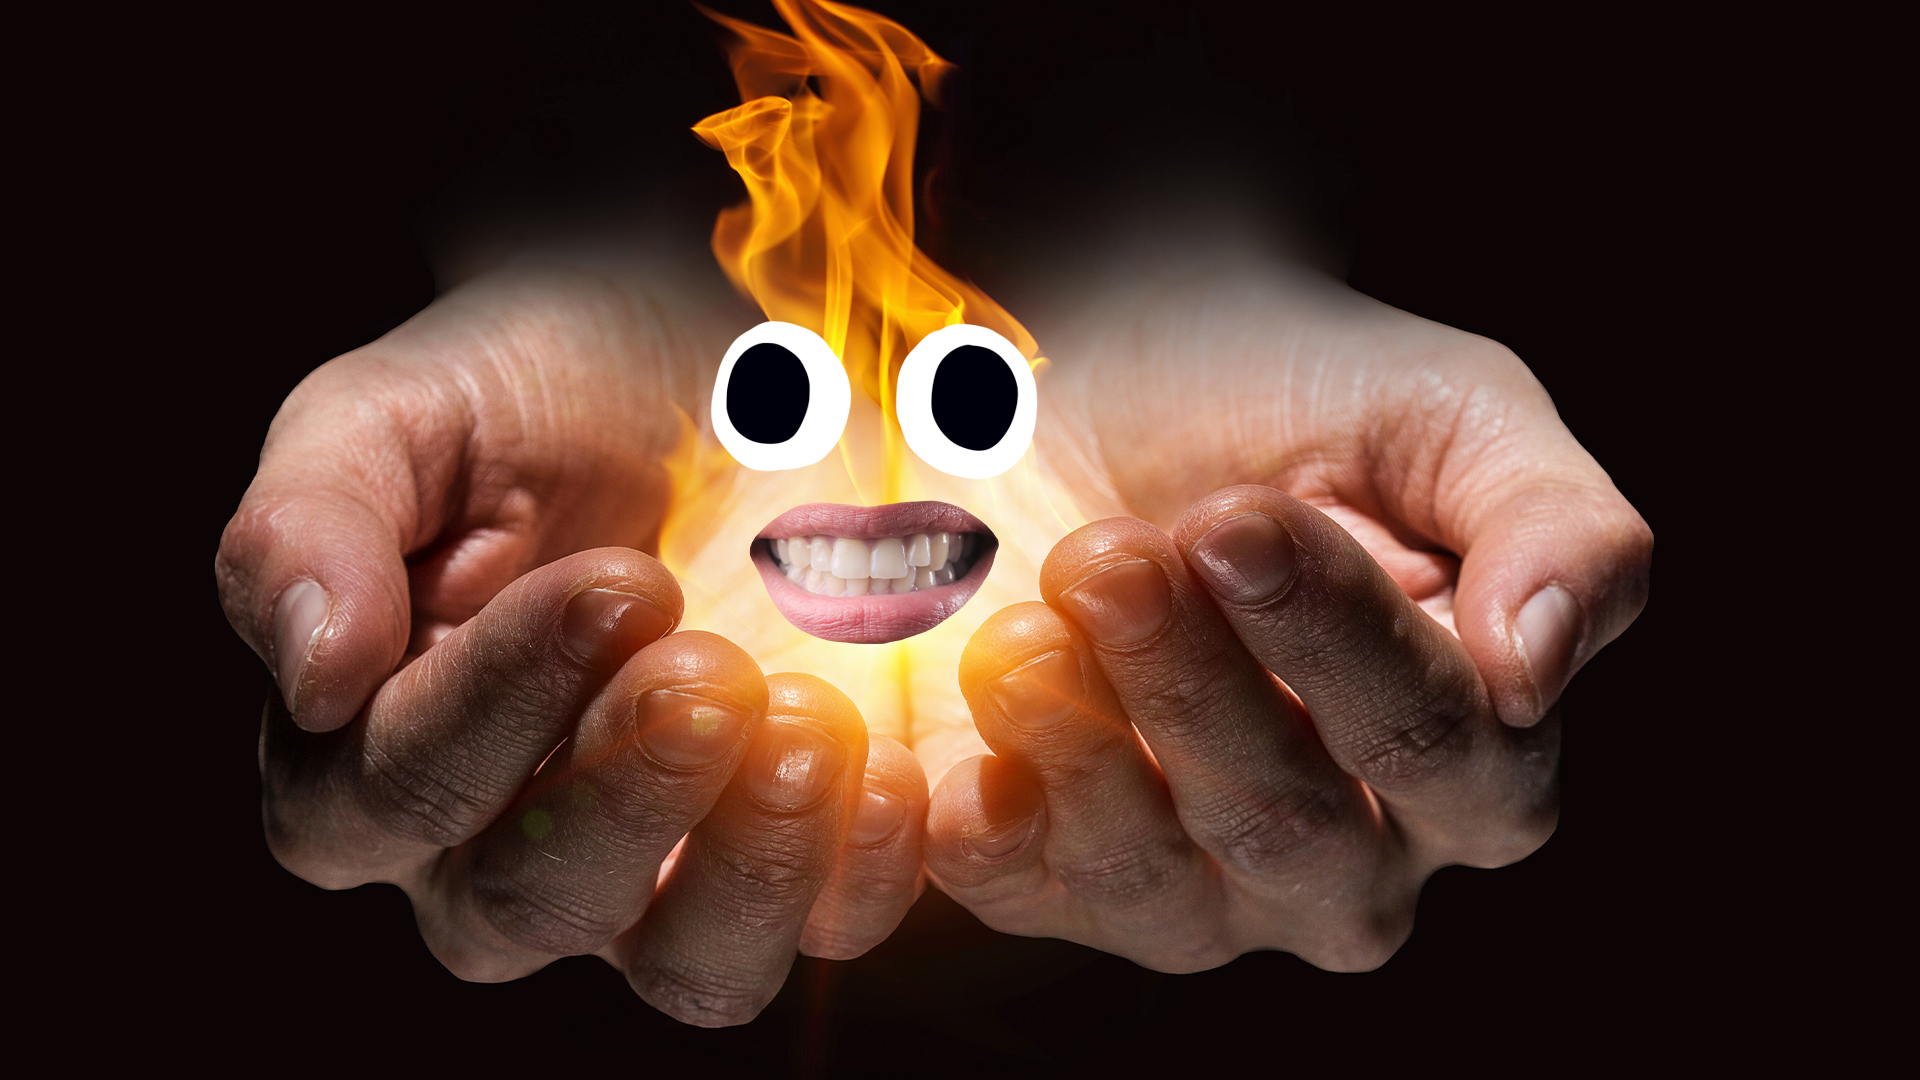 Hands holding fire with smiley face